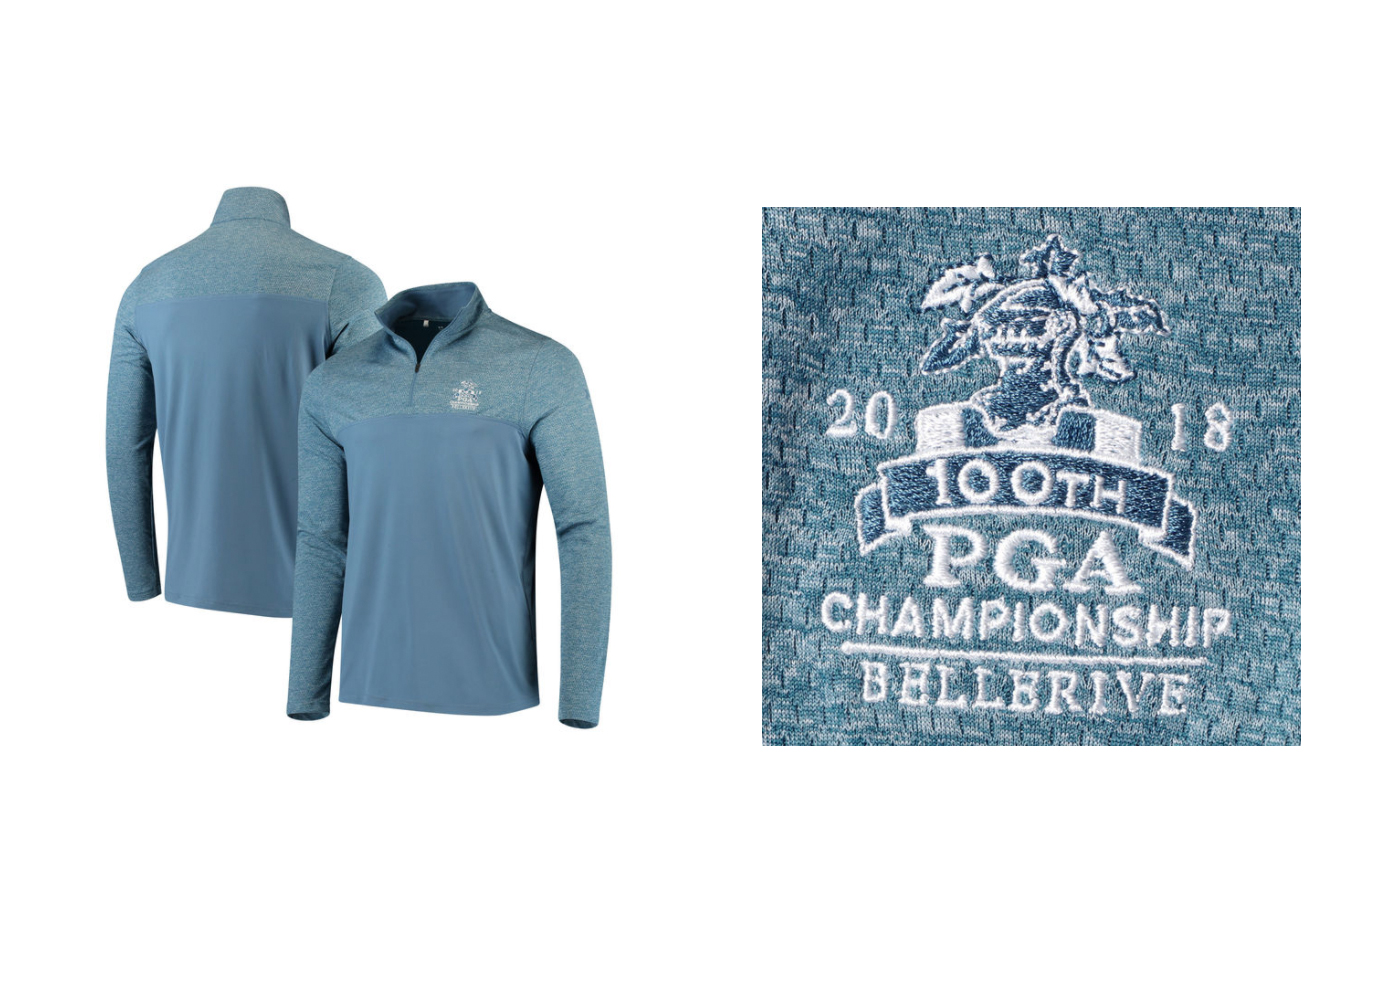 Best golf gifts: The 7 coolest 100th PGA Championship items you can get right now